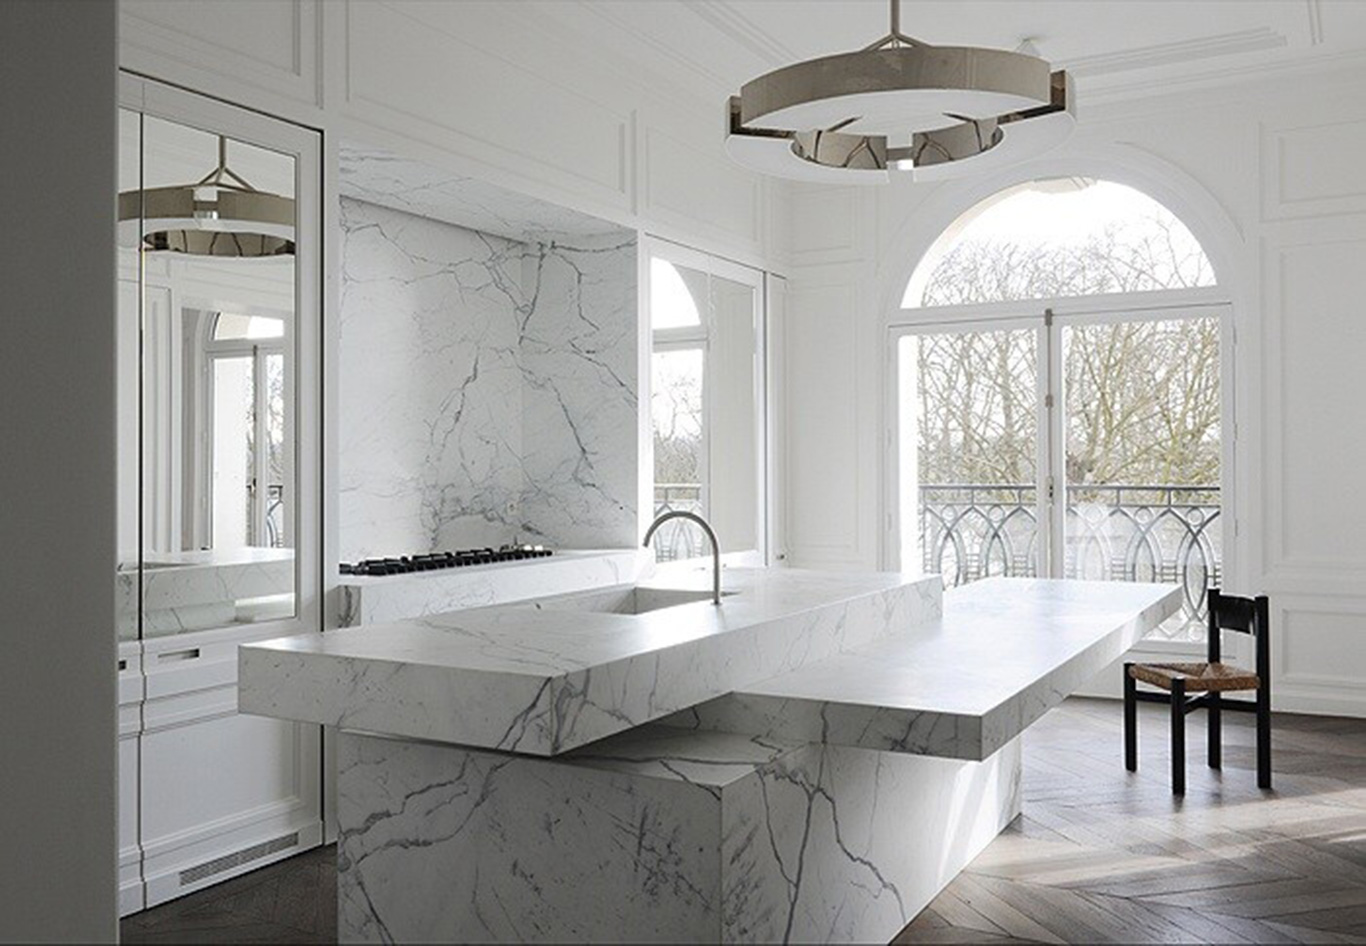 Marble is used widely to achieve this elegant home design.